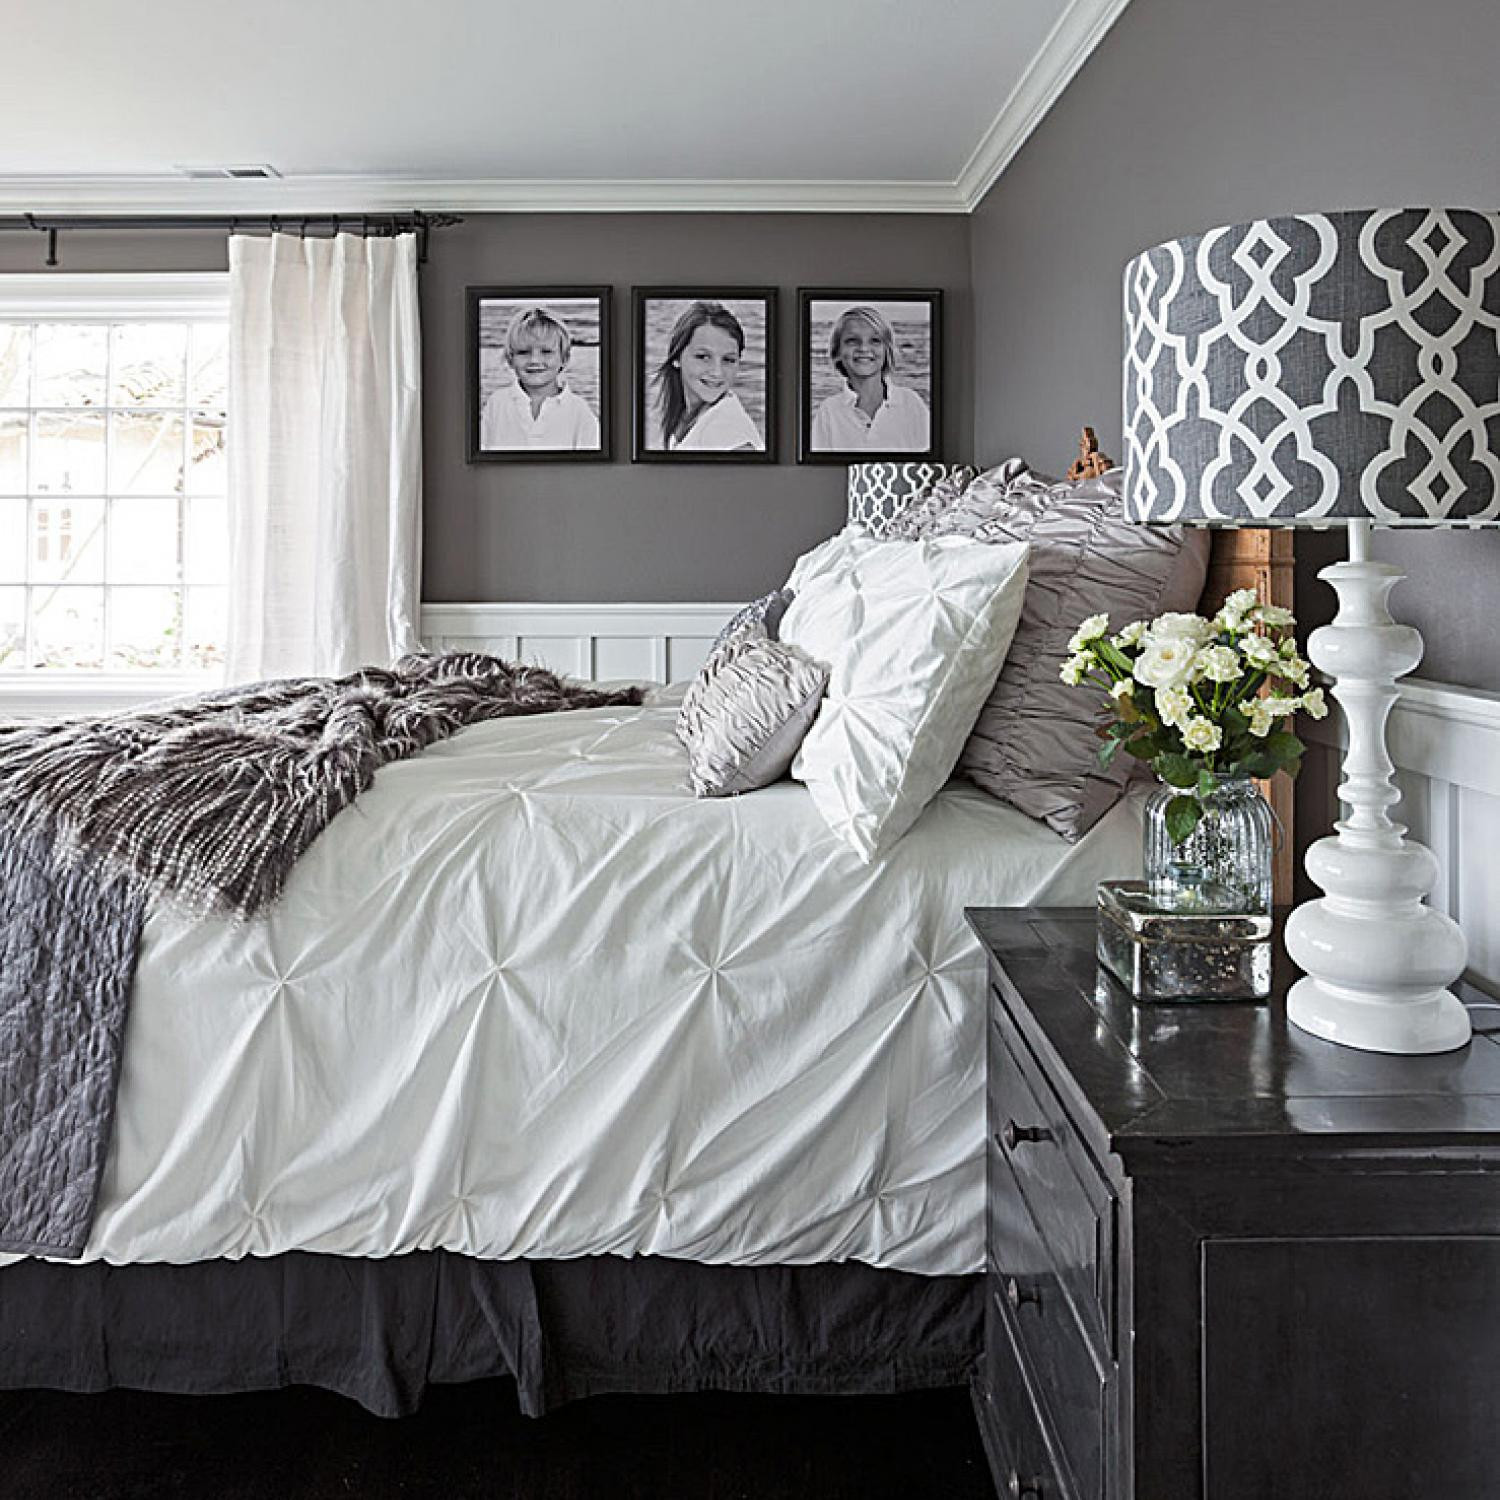 Grey Wall Bedroom Ideas
 Gorgeous Gray and White Bedrooms